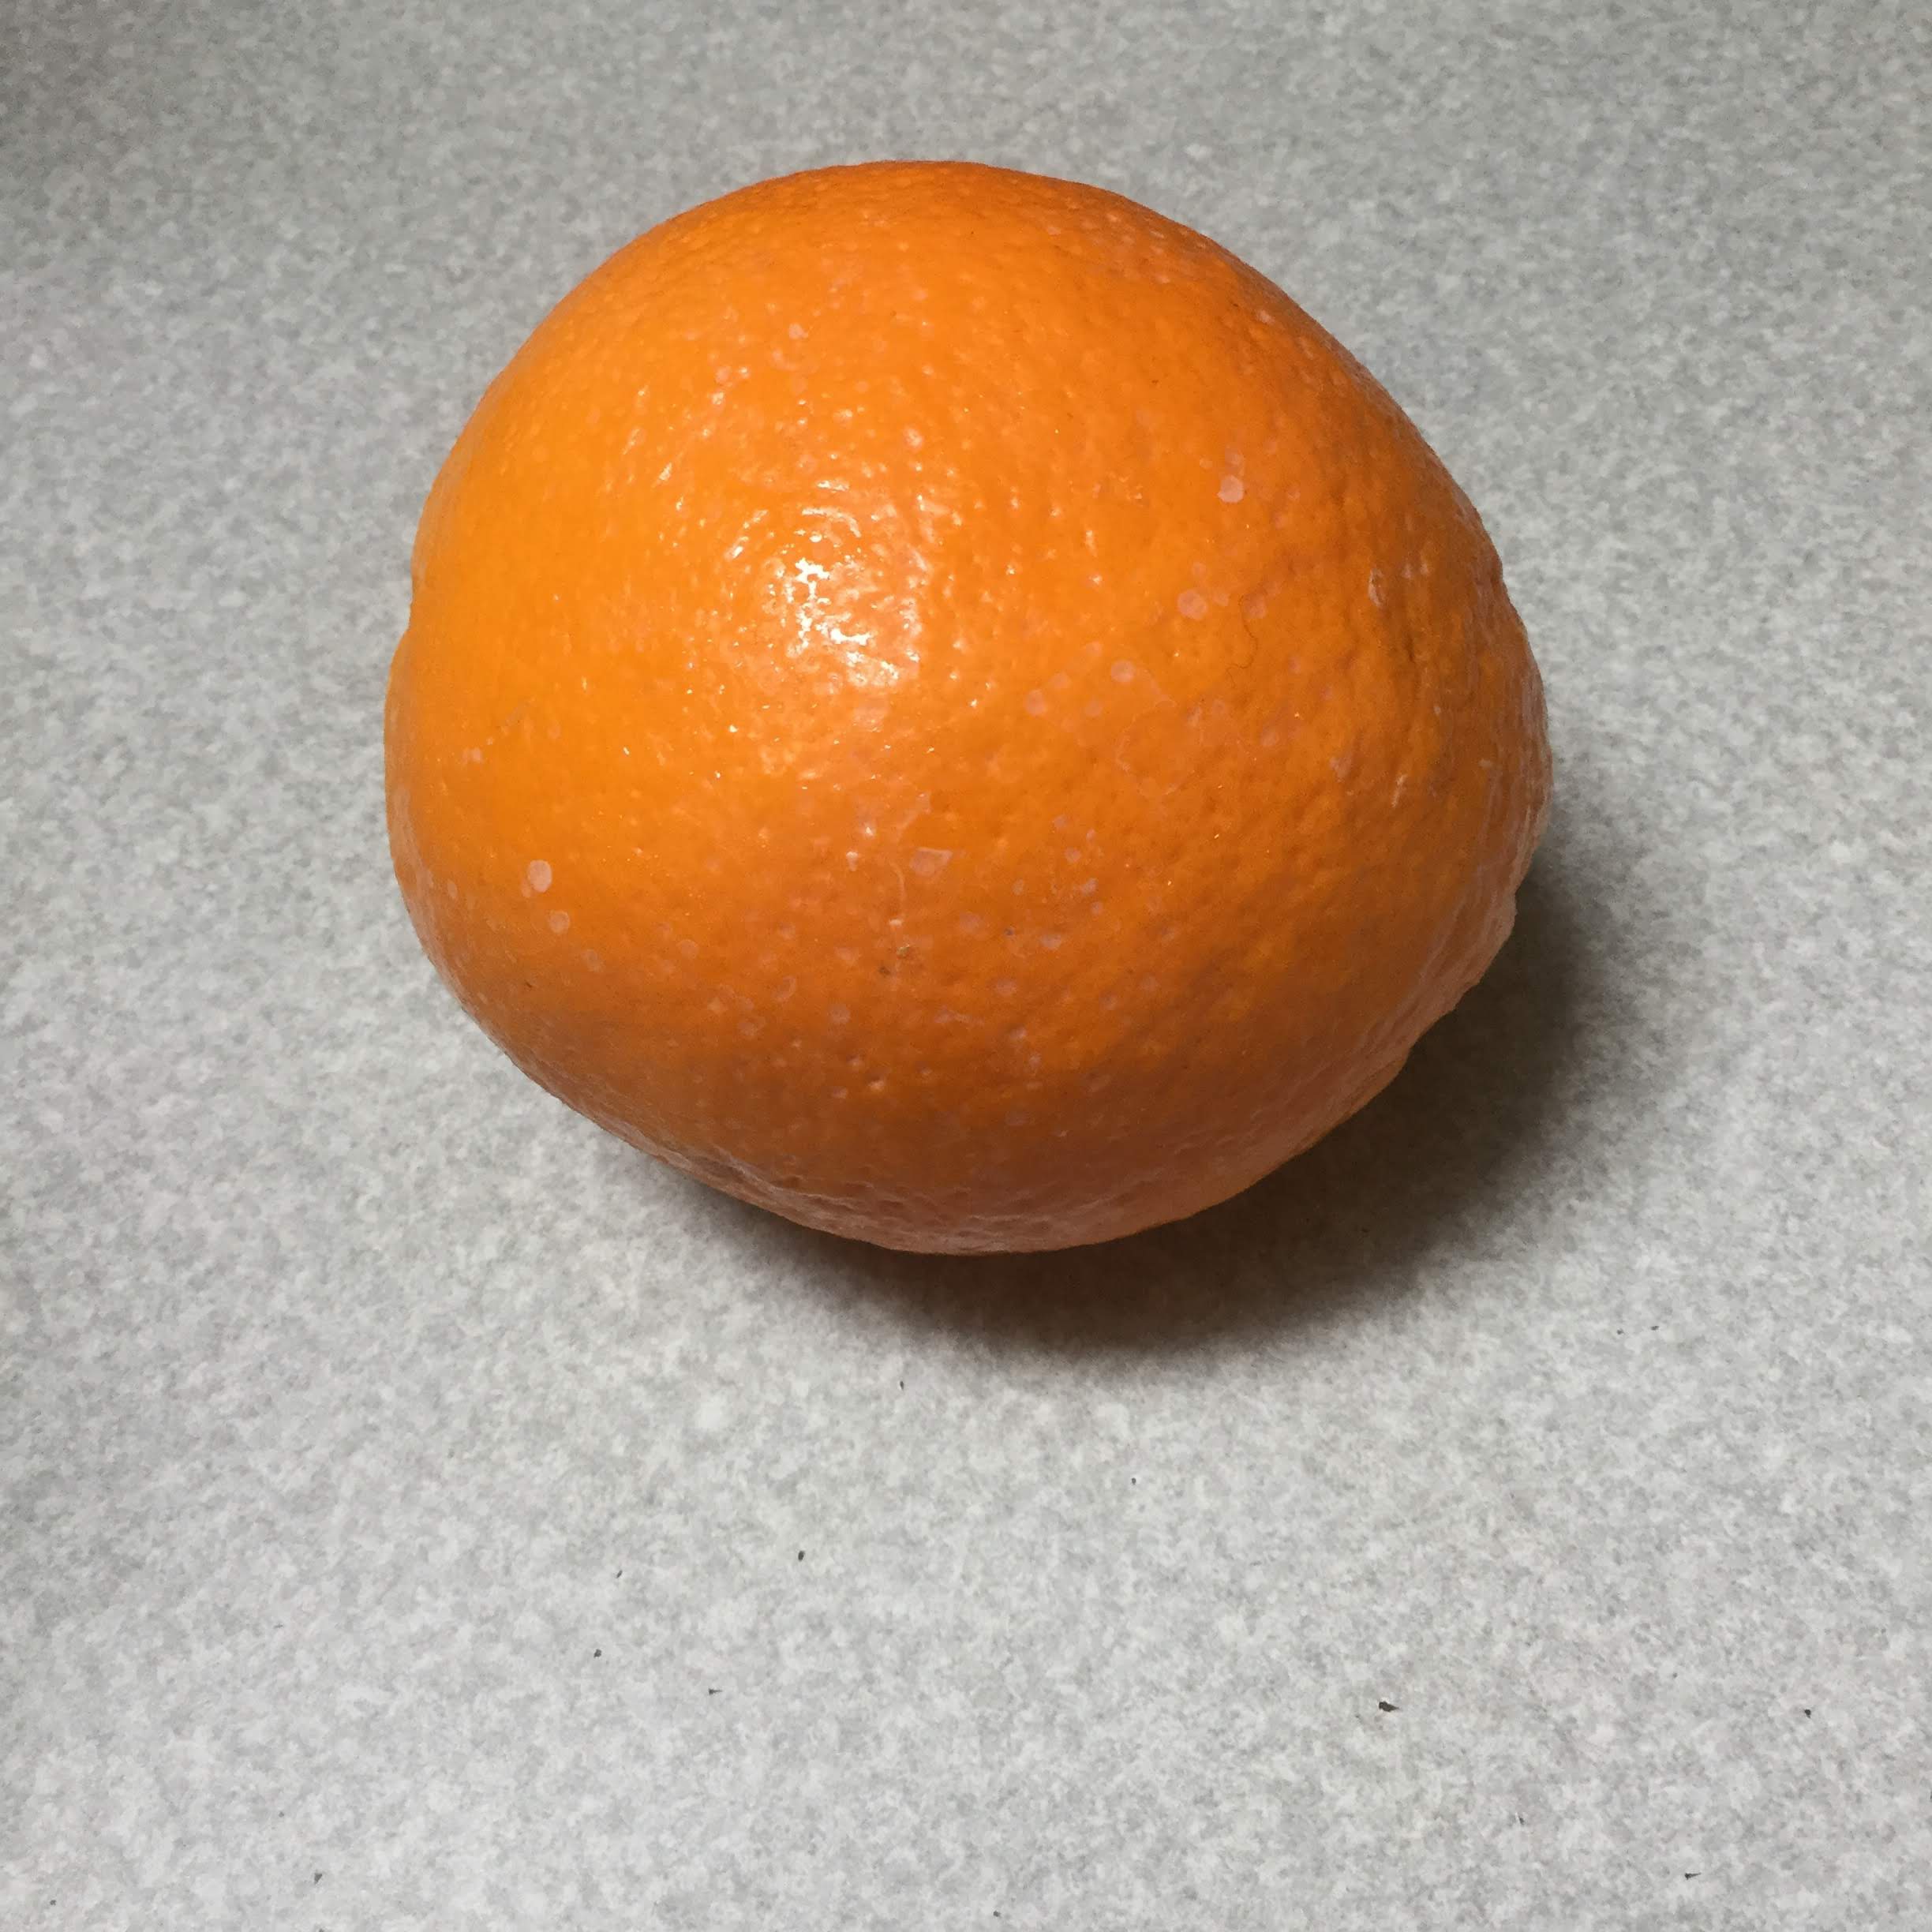 This orange is one reason why I shop locally owned